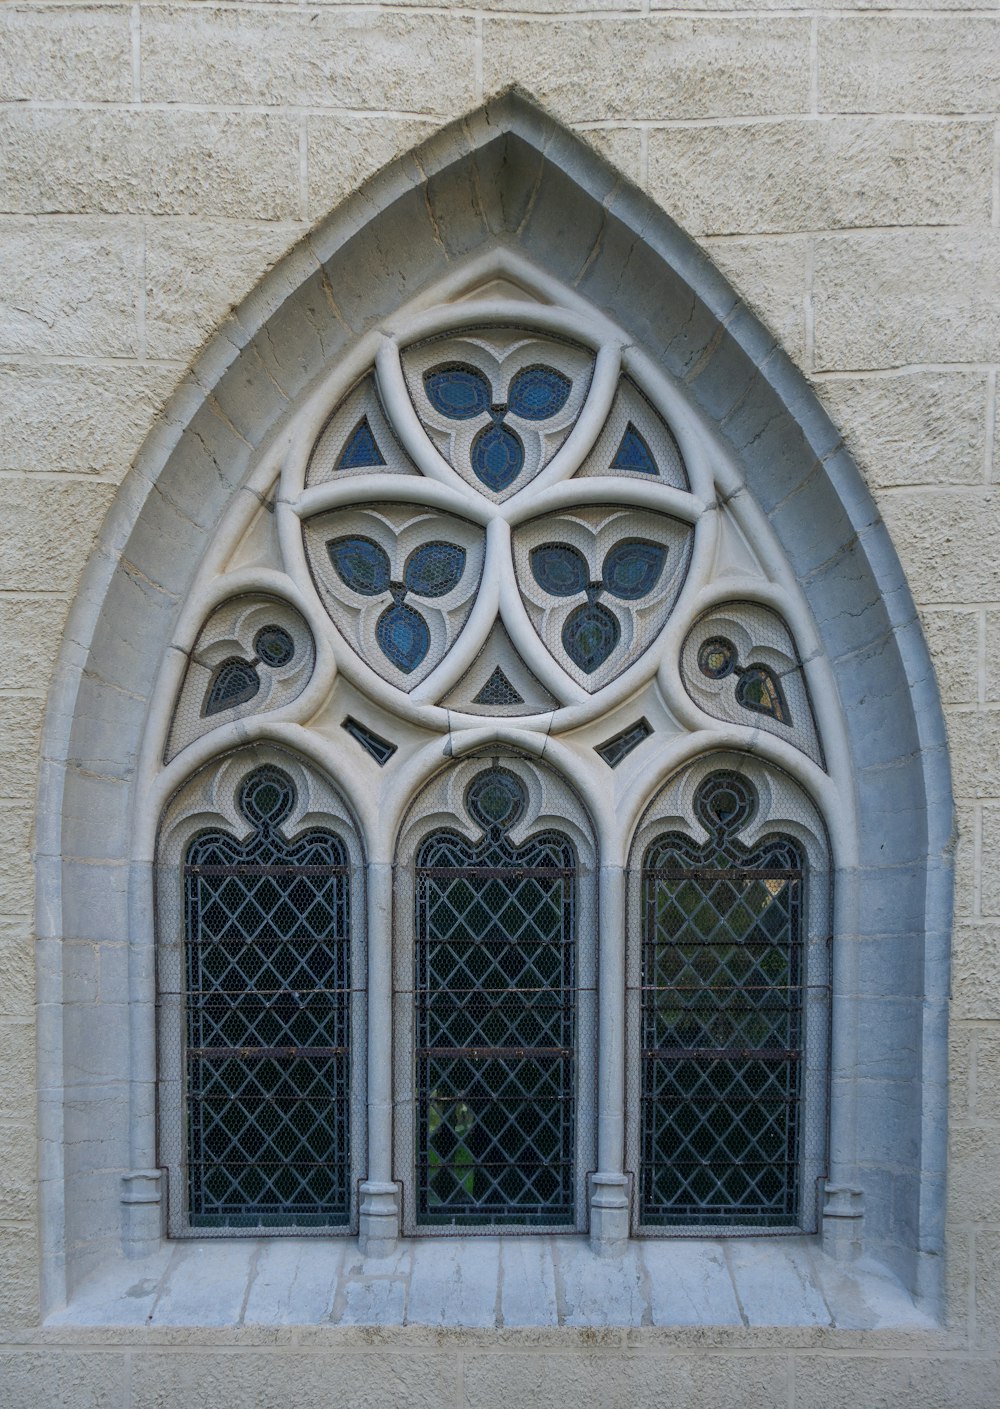 a window in a stone building with a decorative design